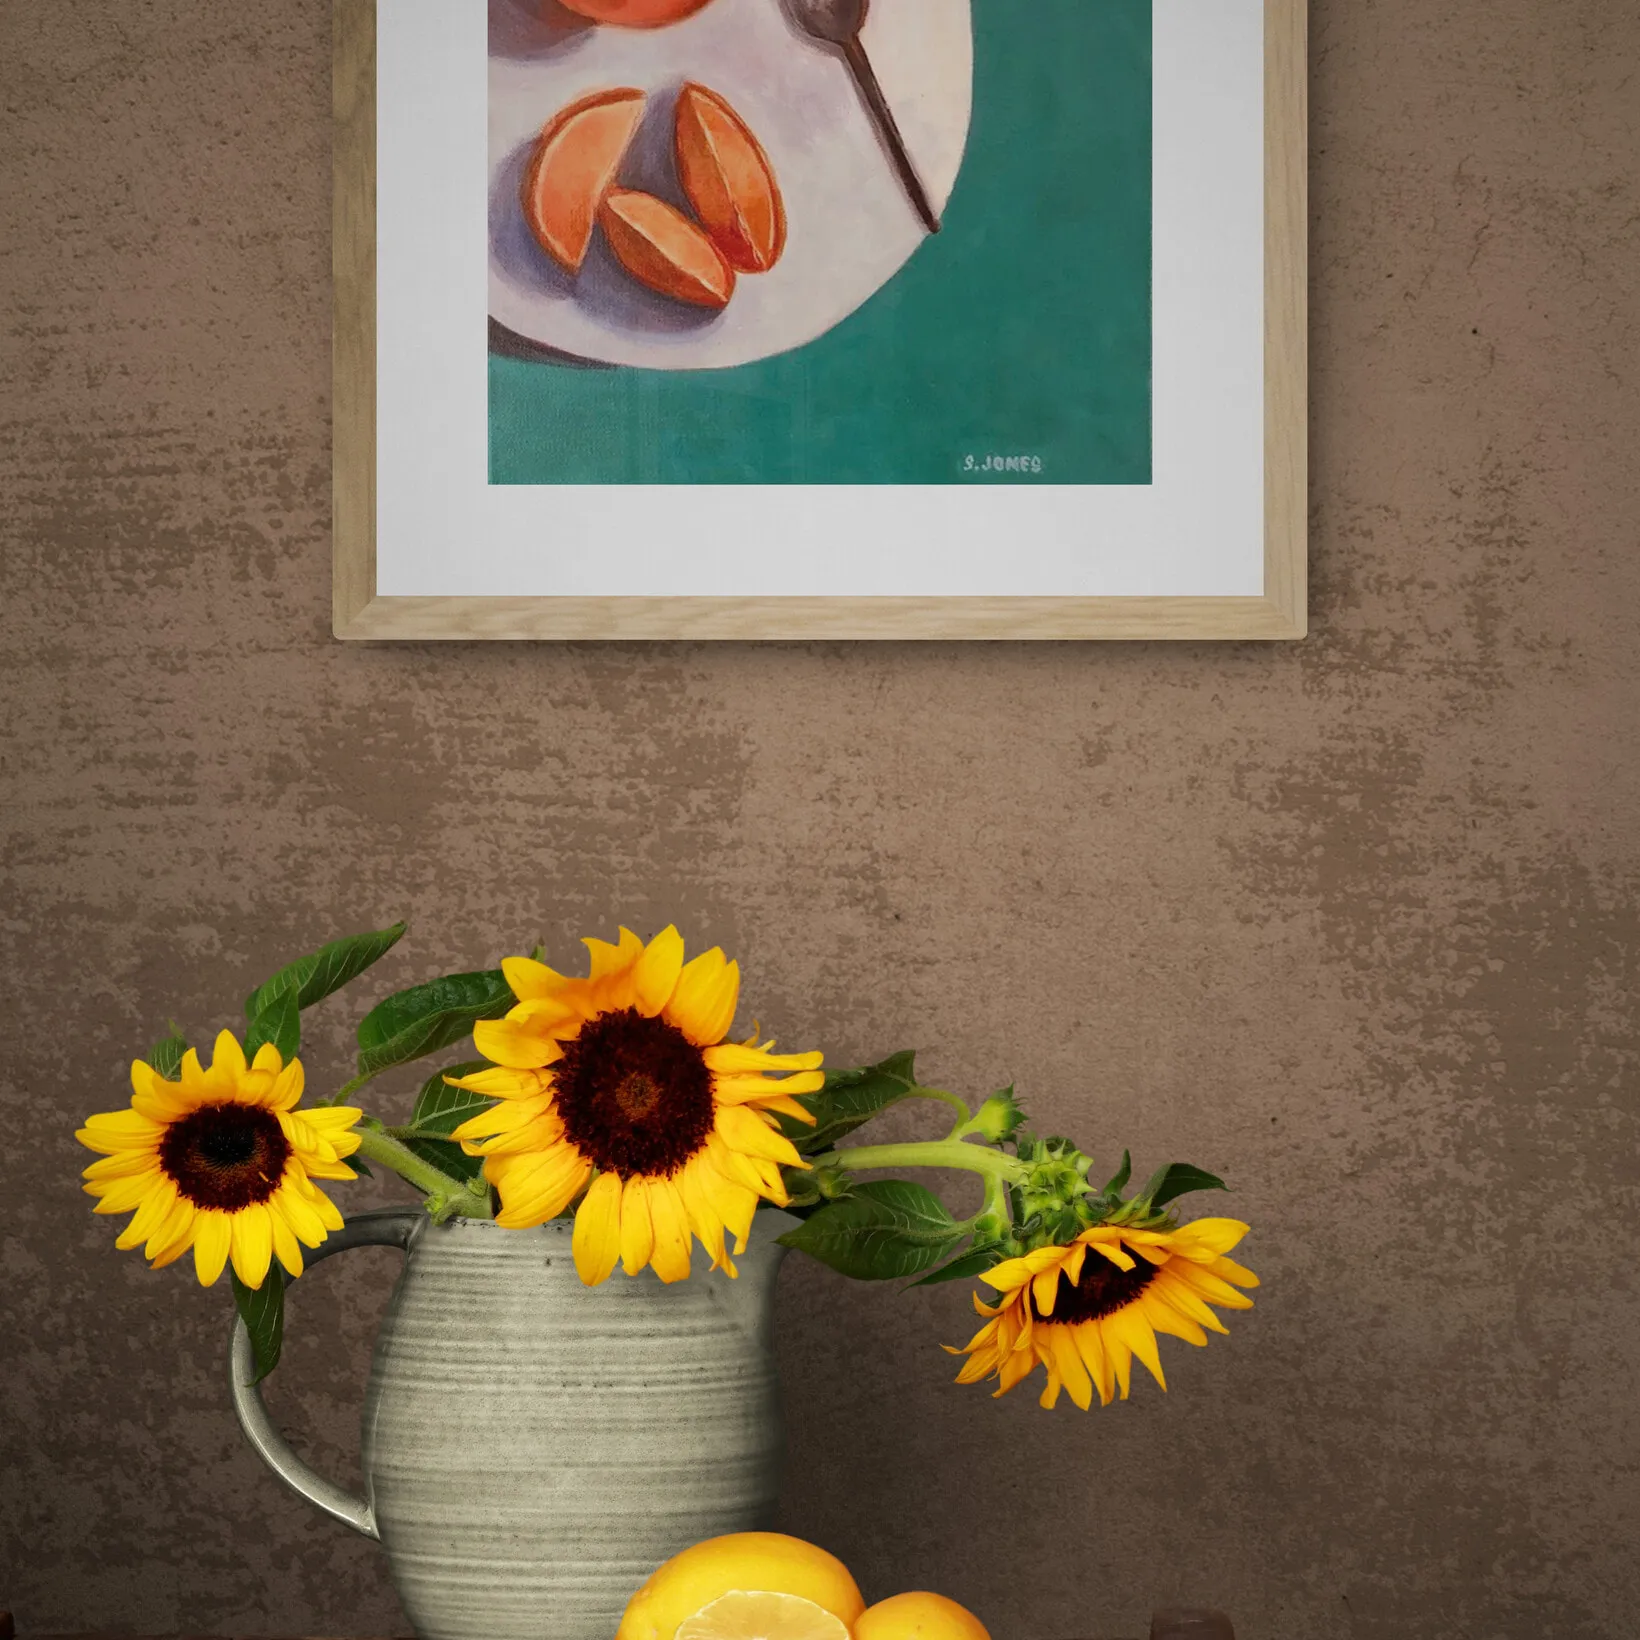 Rustic_bench_with_sunflowers_in_jug